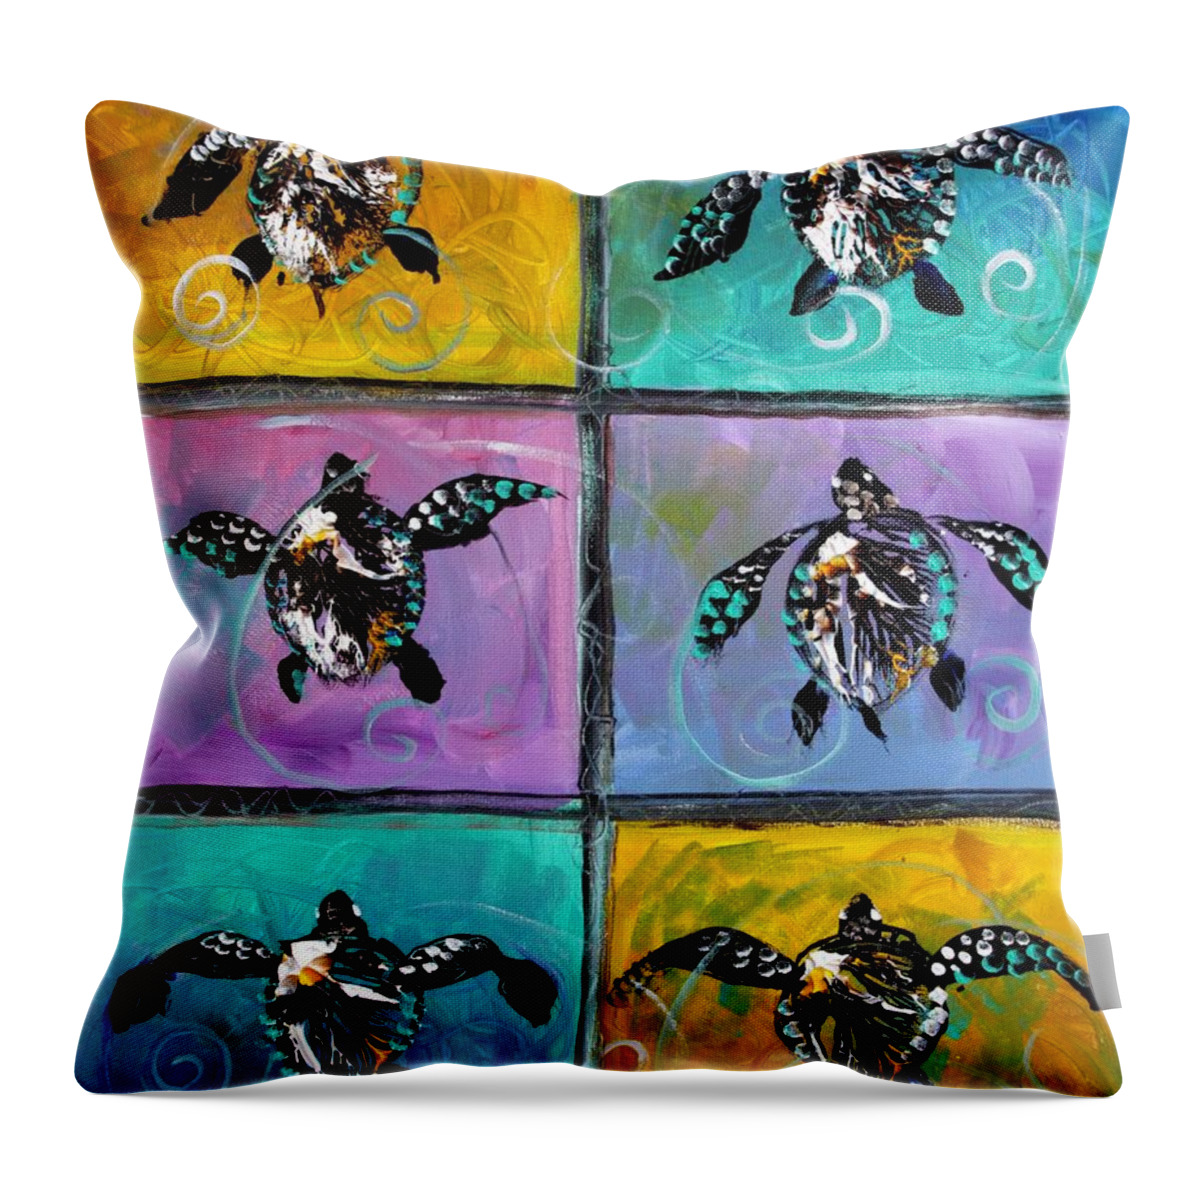 Sea Turtles Throw Pillow featuring the painting Baby Sea Turtles Six by J Vincent Scarpace